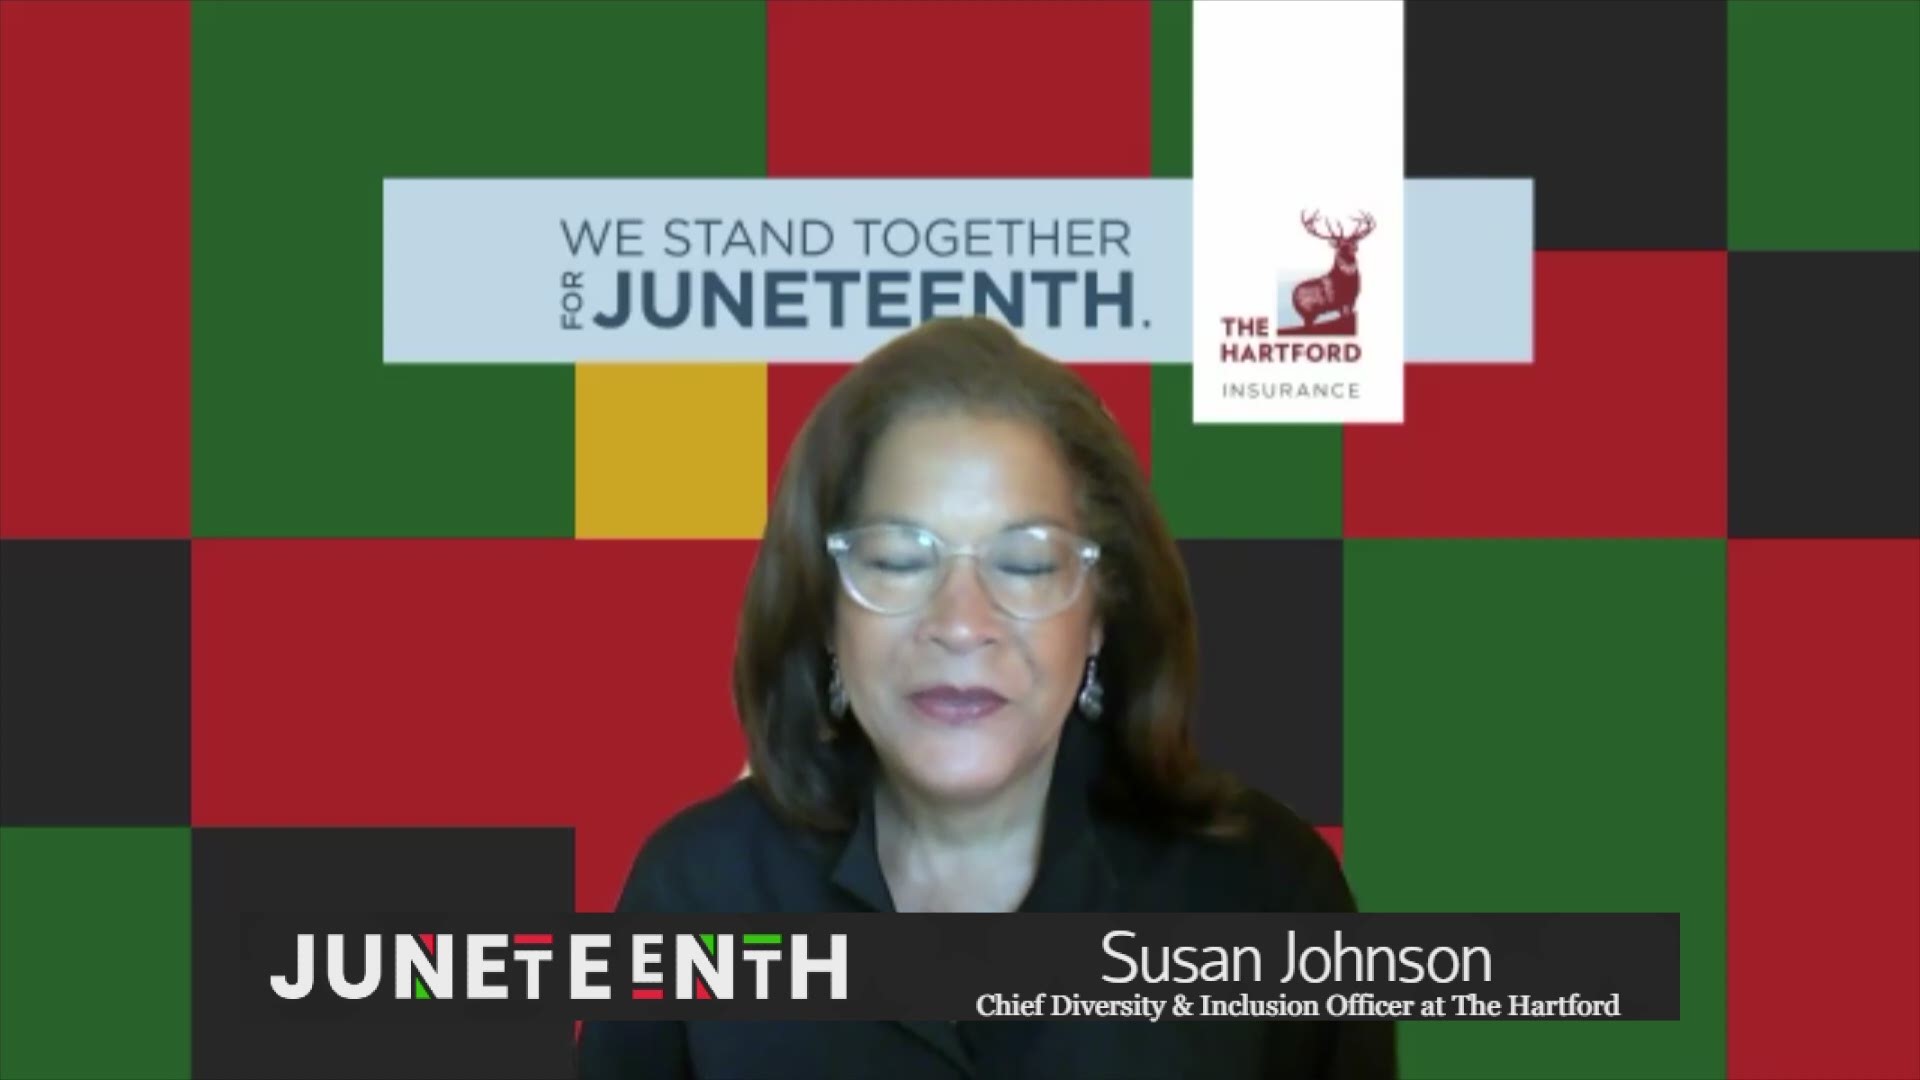 As Chief Diversity & Inclusion Officer, Johnson also discussed efforts by the organization to recognize Juneteenth.